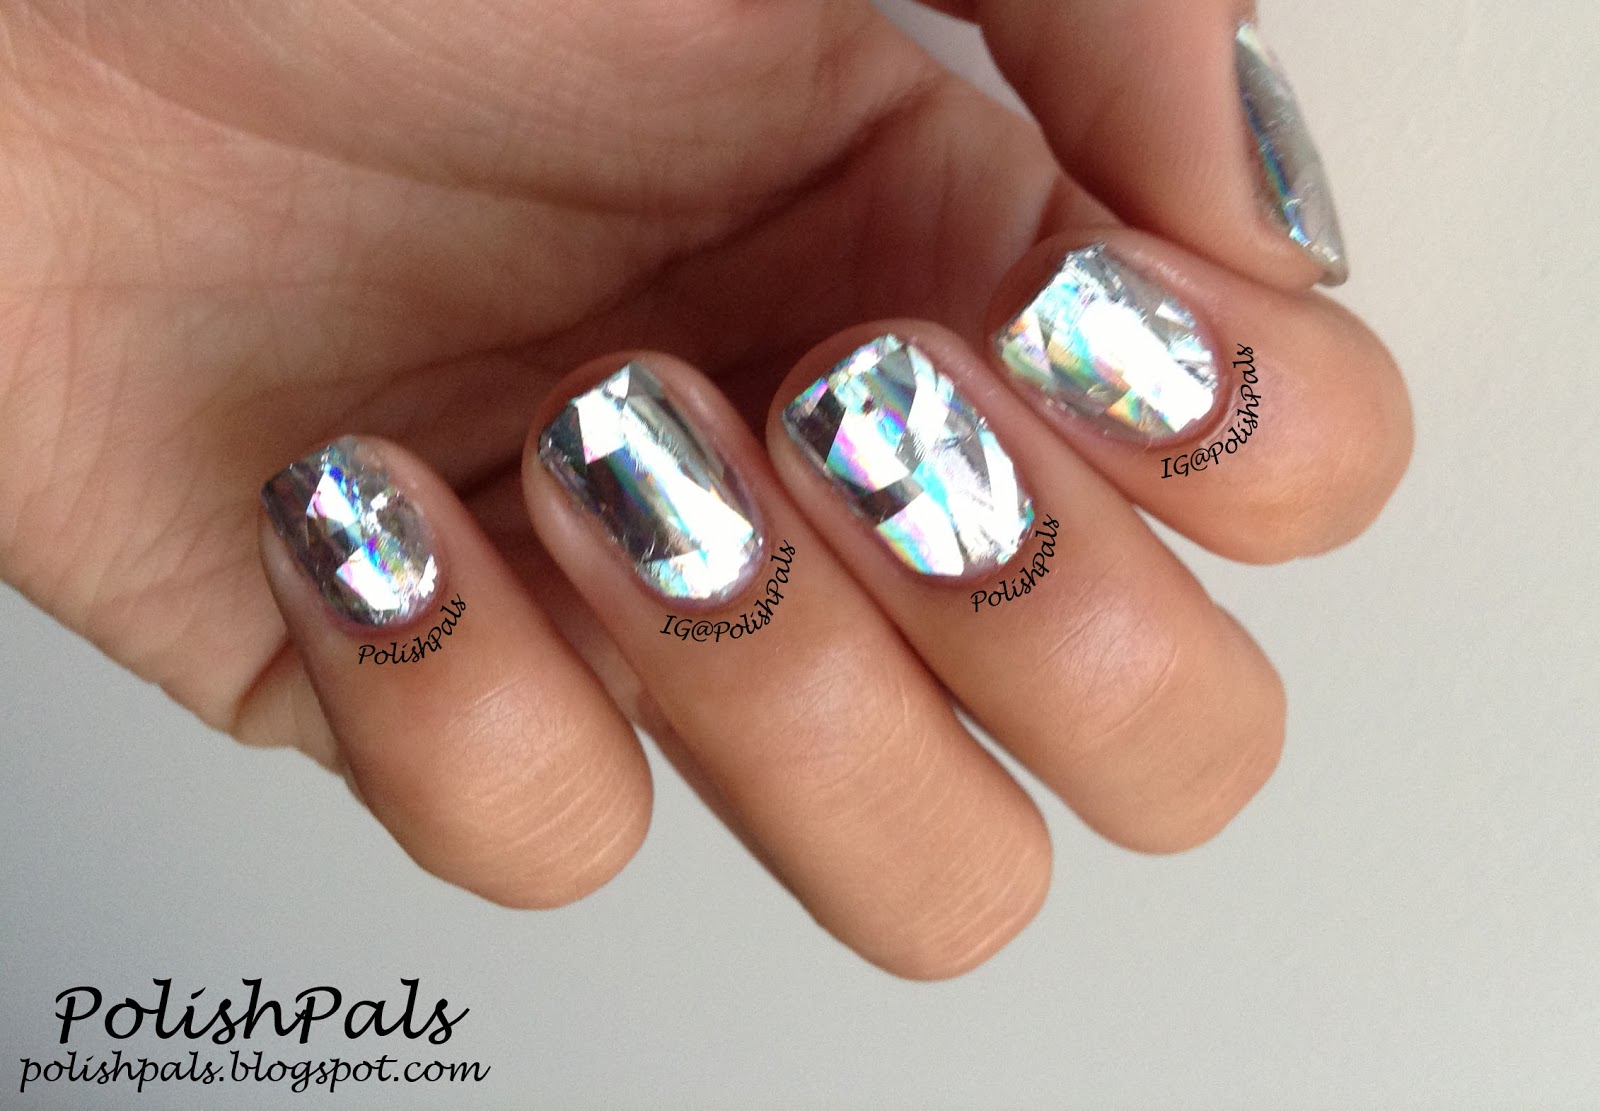 Nail Art Foil Glue vs. Nail Polish: Which is Better for Foil Designs? - wide 7